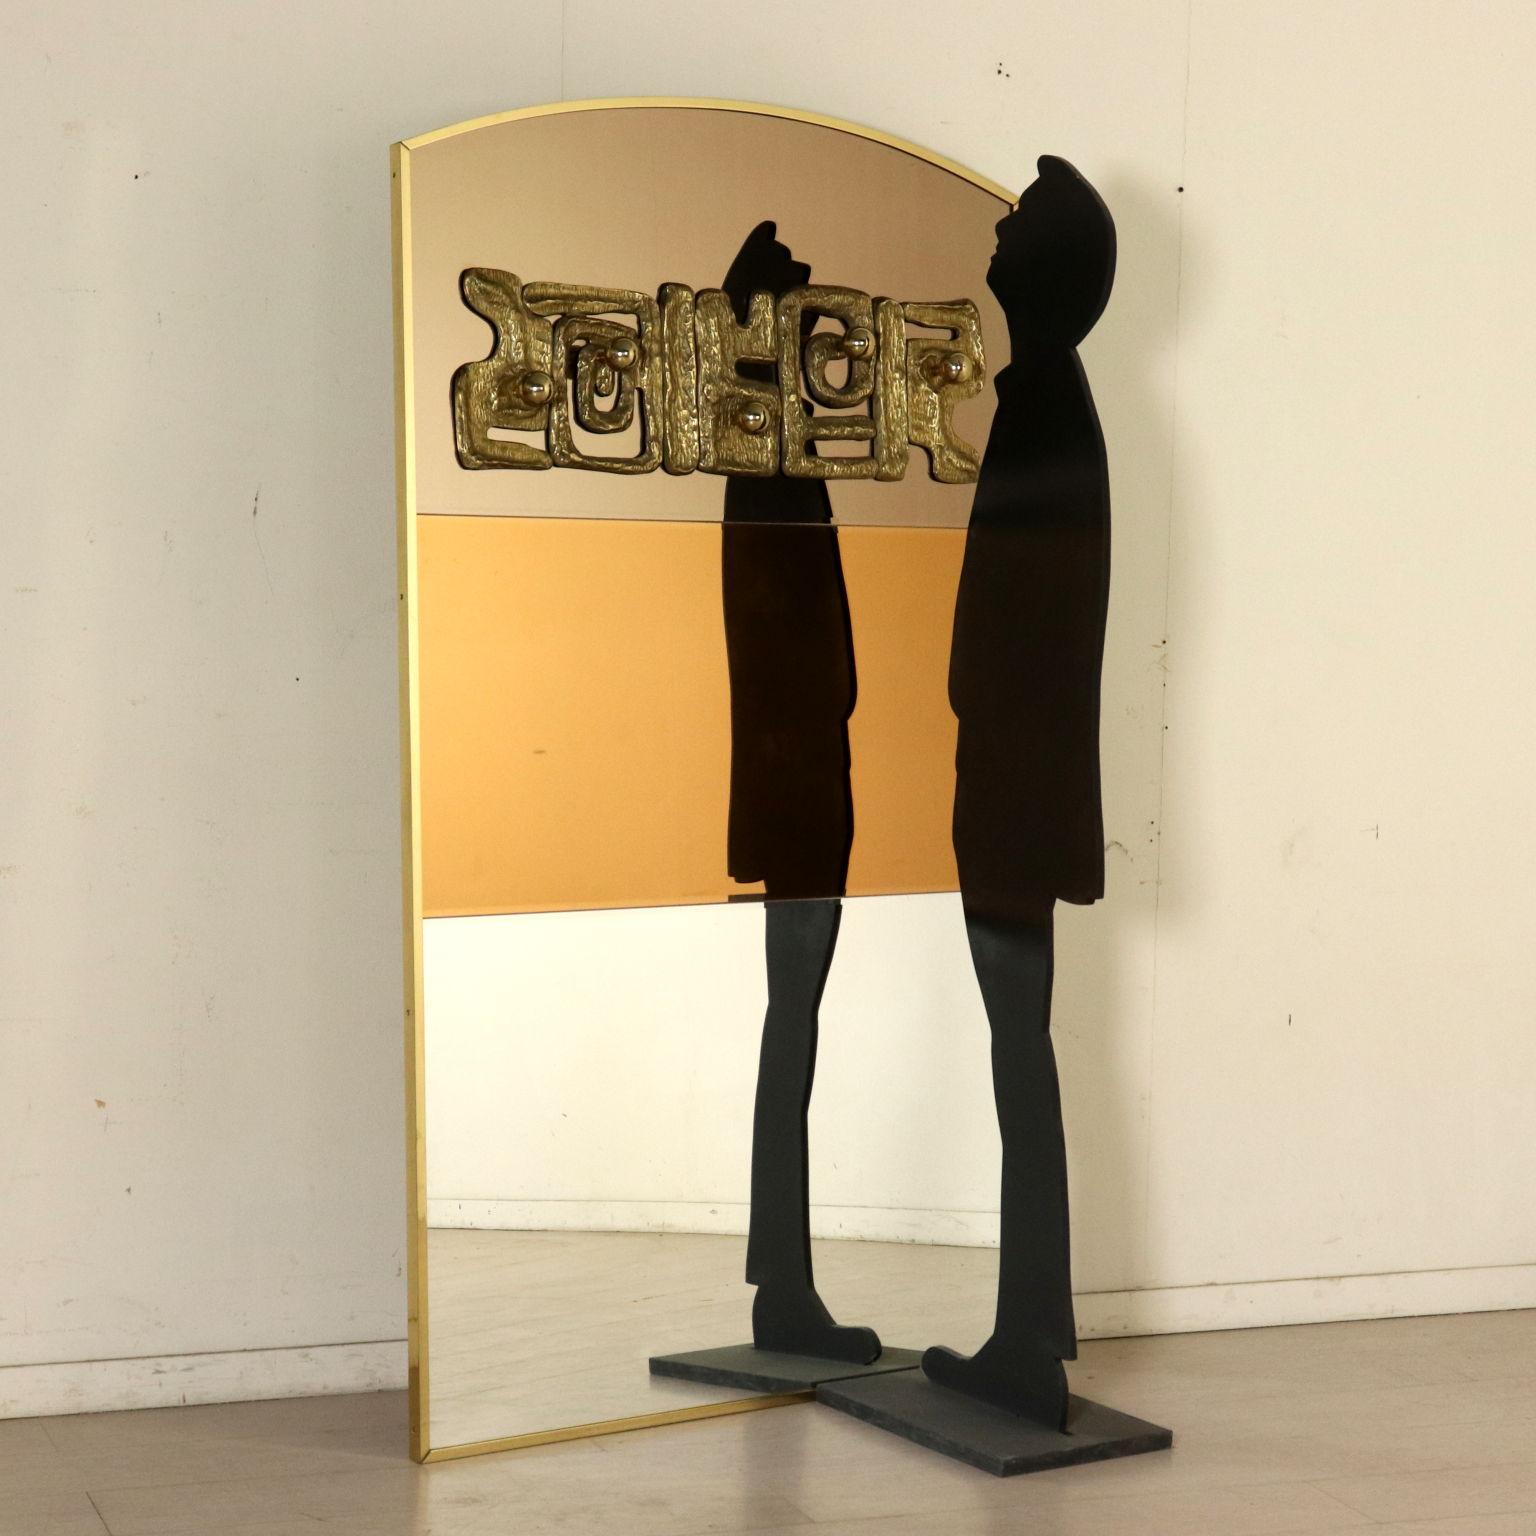 A wall mirror on a wooden panel designed by Luciano Frigerio (1928-1999), brass frame and brass fusion. Manufactured in Italy, 1970s.